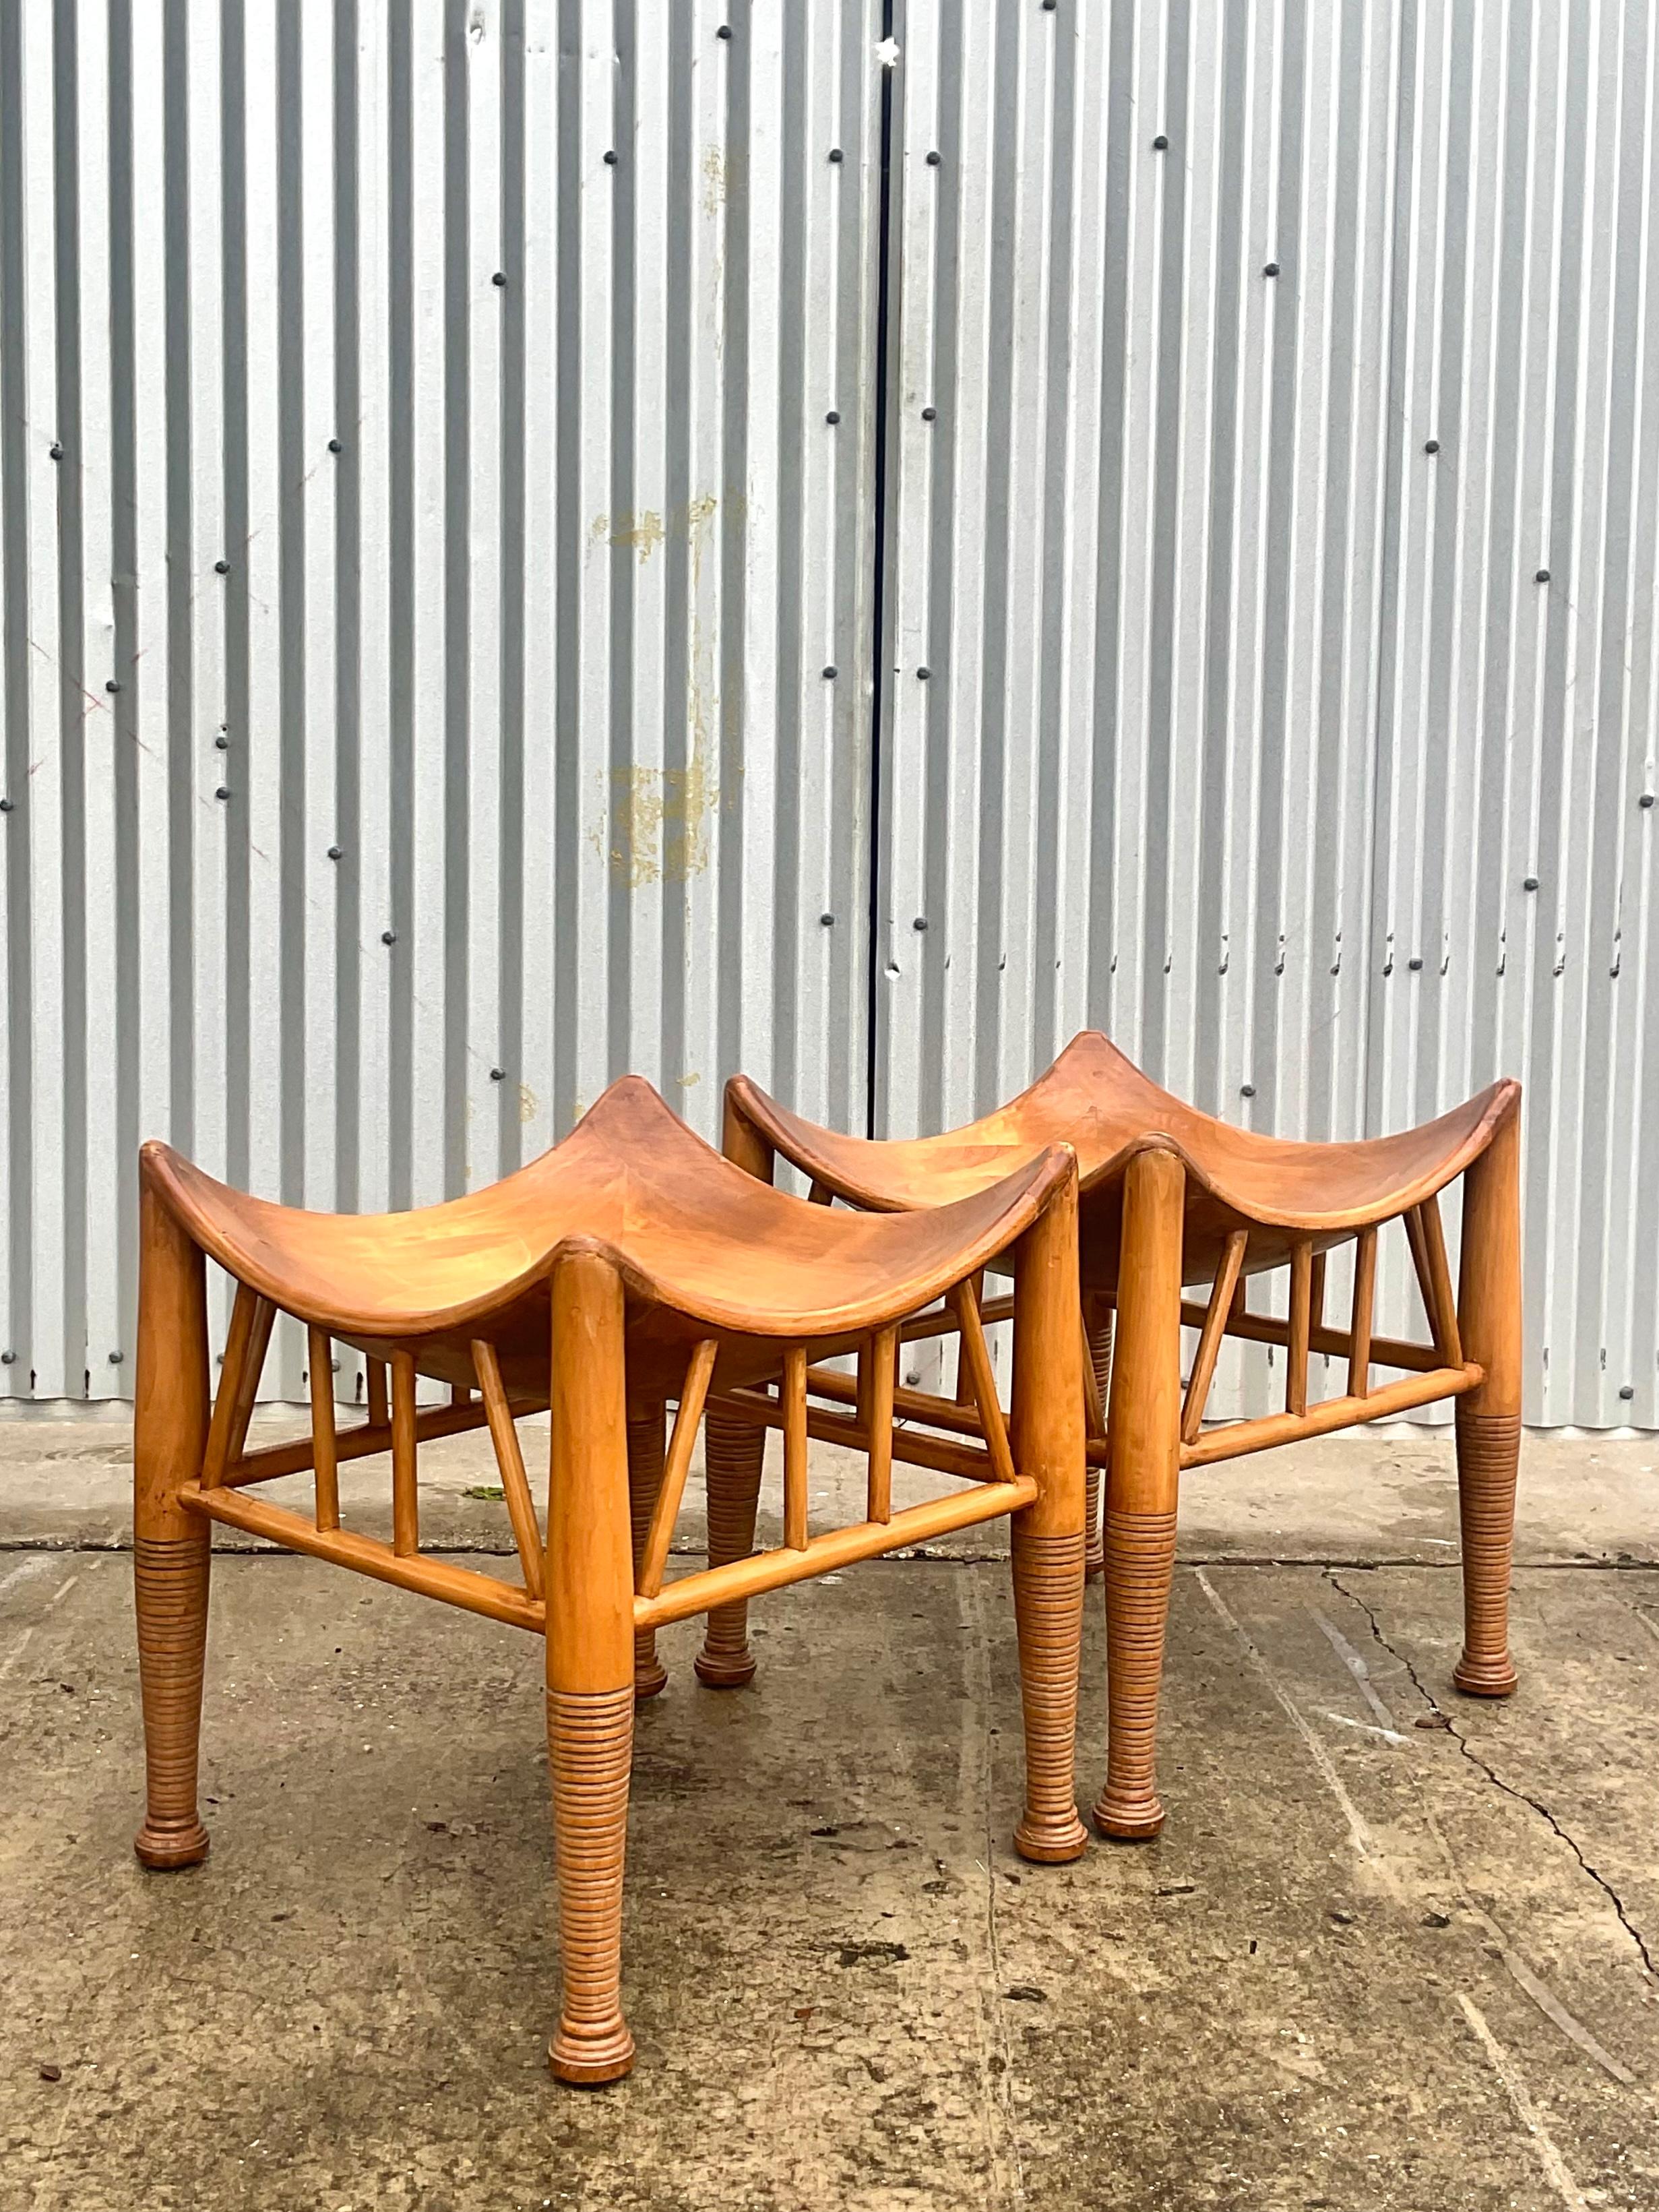 A fantastic pair of 1900s Liberty style Thebes stools. Hand crafted after classic Egyptian artifacts ans patented by Liberty and Co in 1884. Solid wood interlocking flared tops with classic stacked legs. Acquired from a Palm Beach estate.